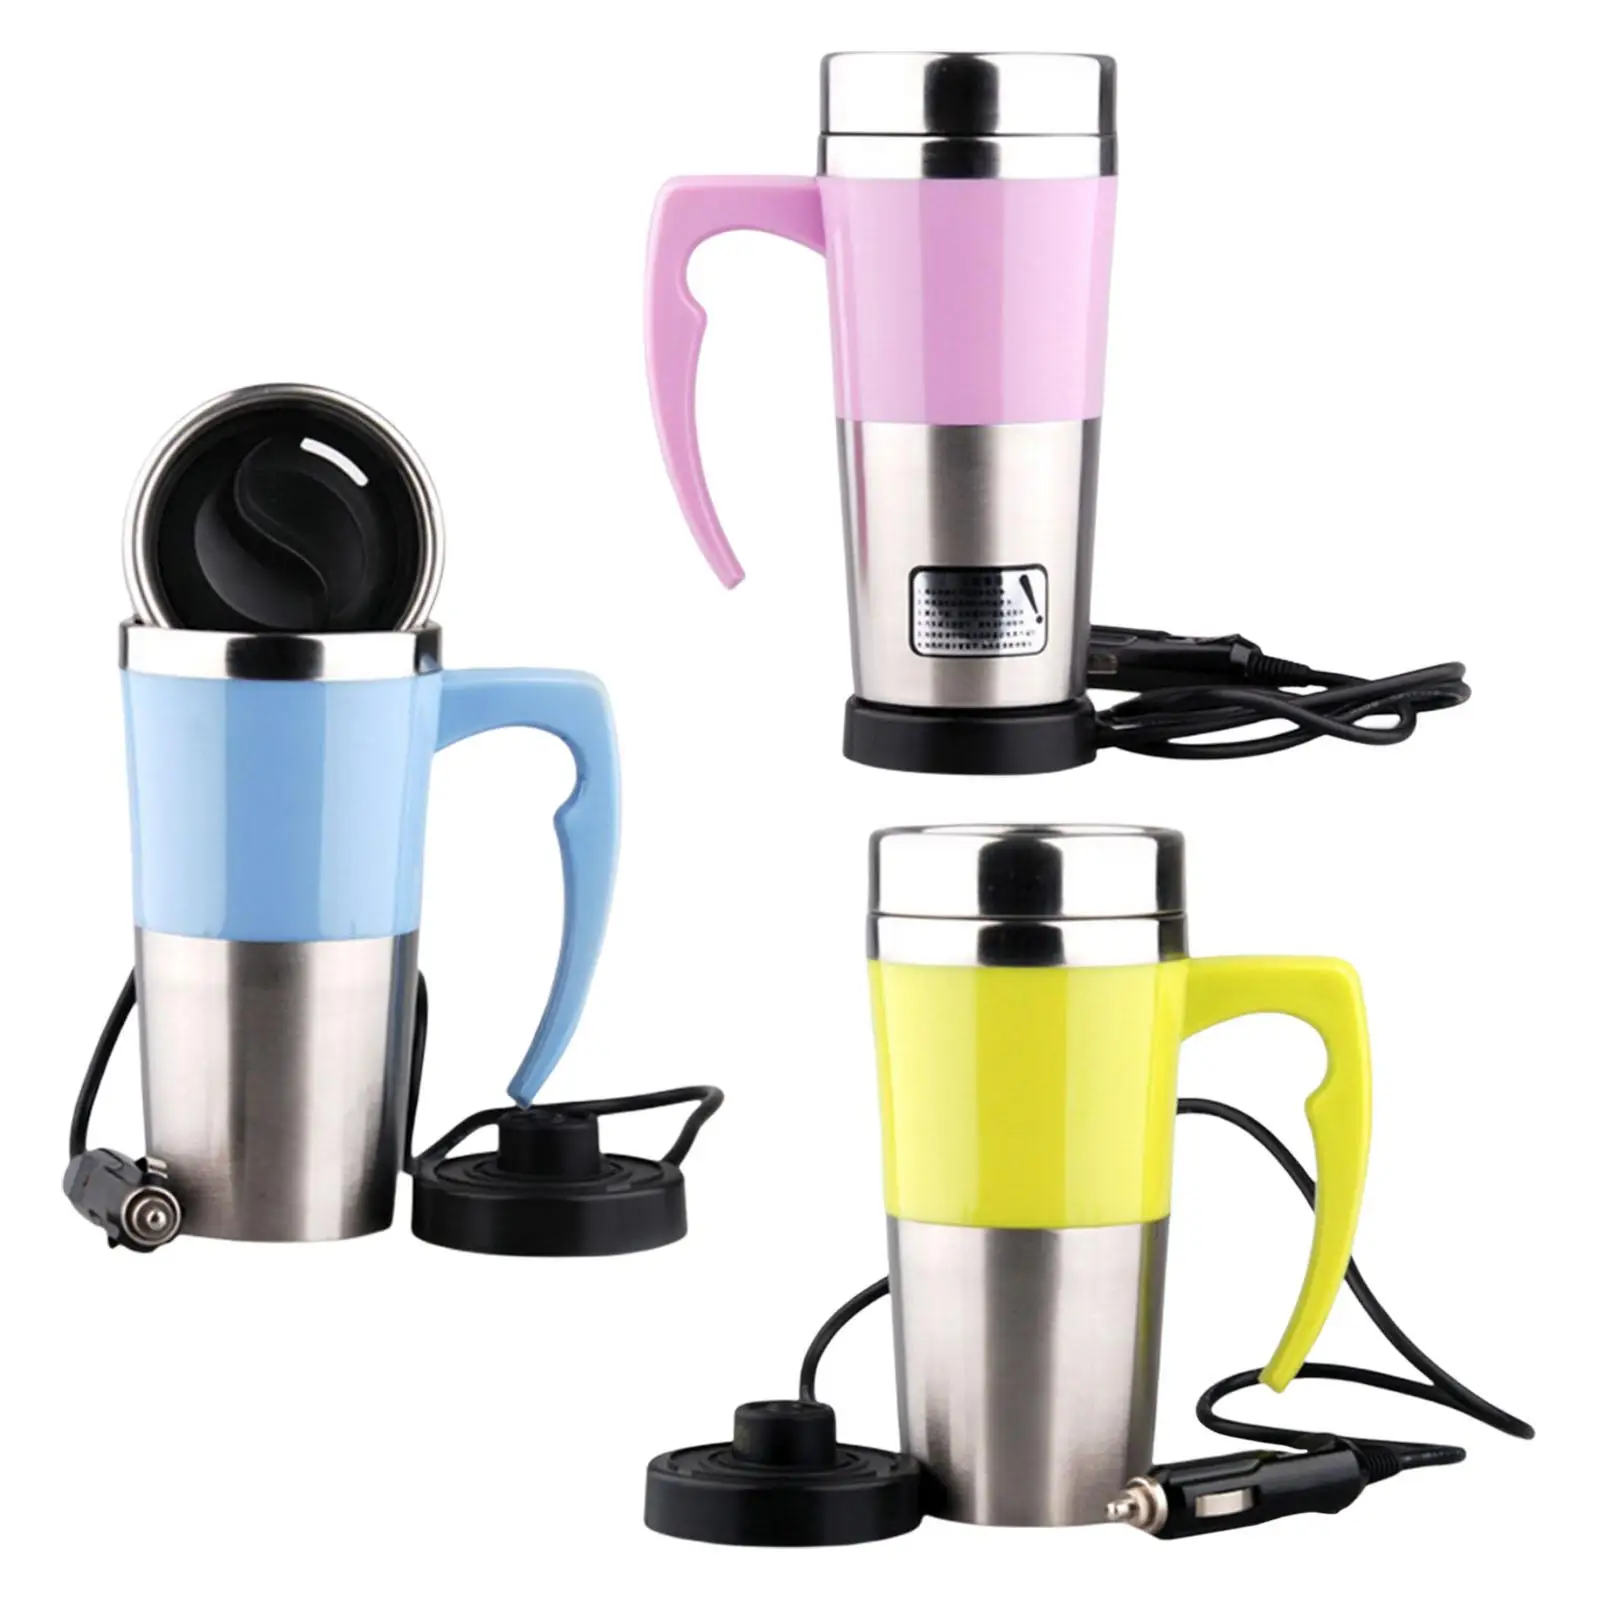   Kettle 350ml 12V Travel Heating Cup for Tea Hot Water Eggs